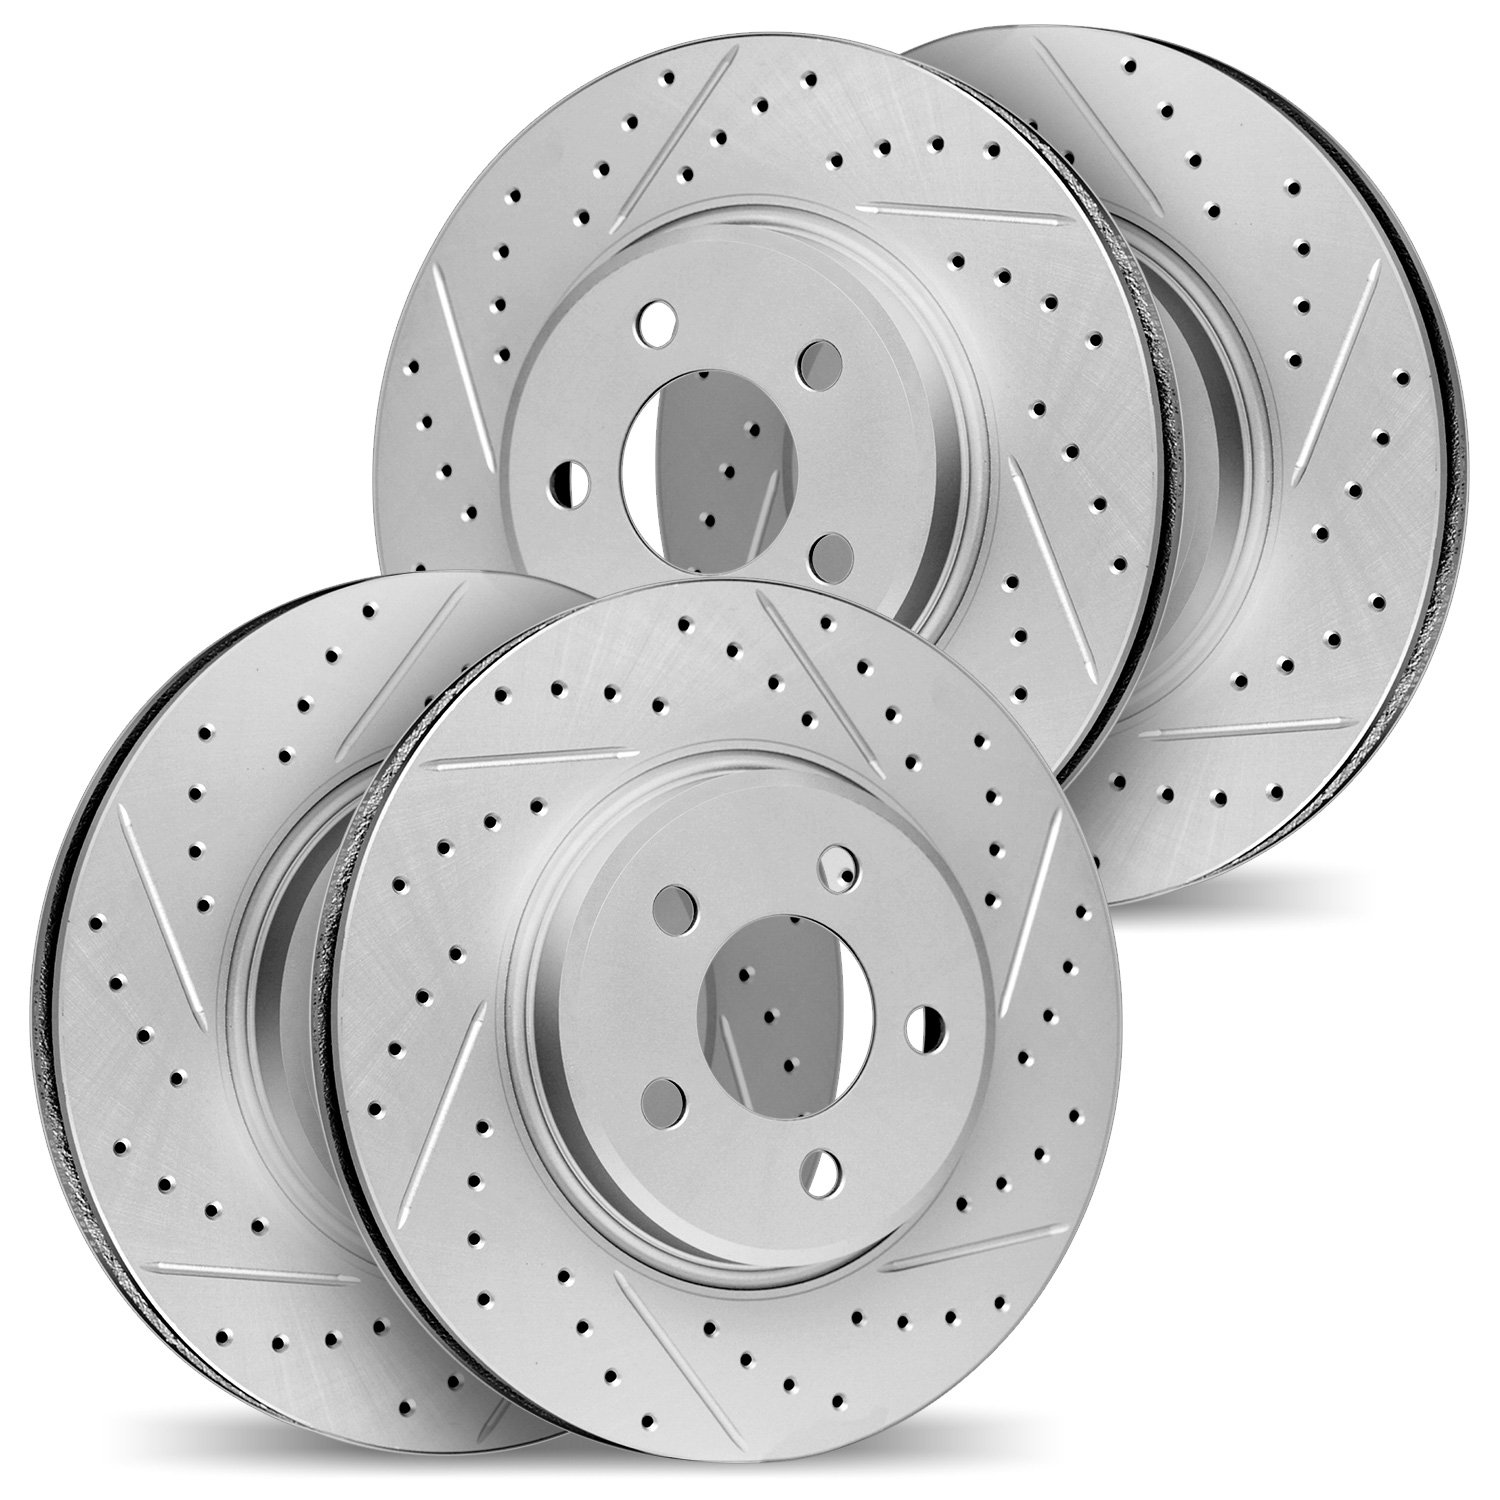 2004-67051 Geoperformance Drilled/Slotted Brake Rotors, 2003-2004 Infiniti/Nissan, Position: Front and Rear